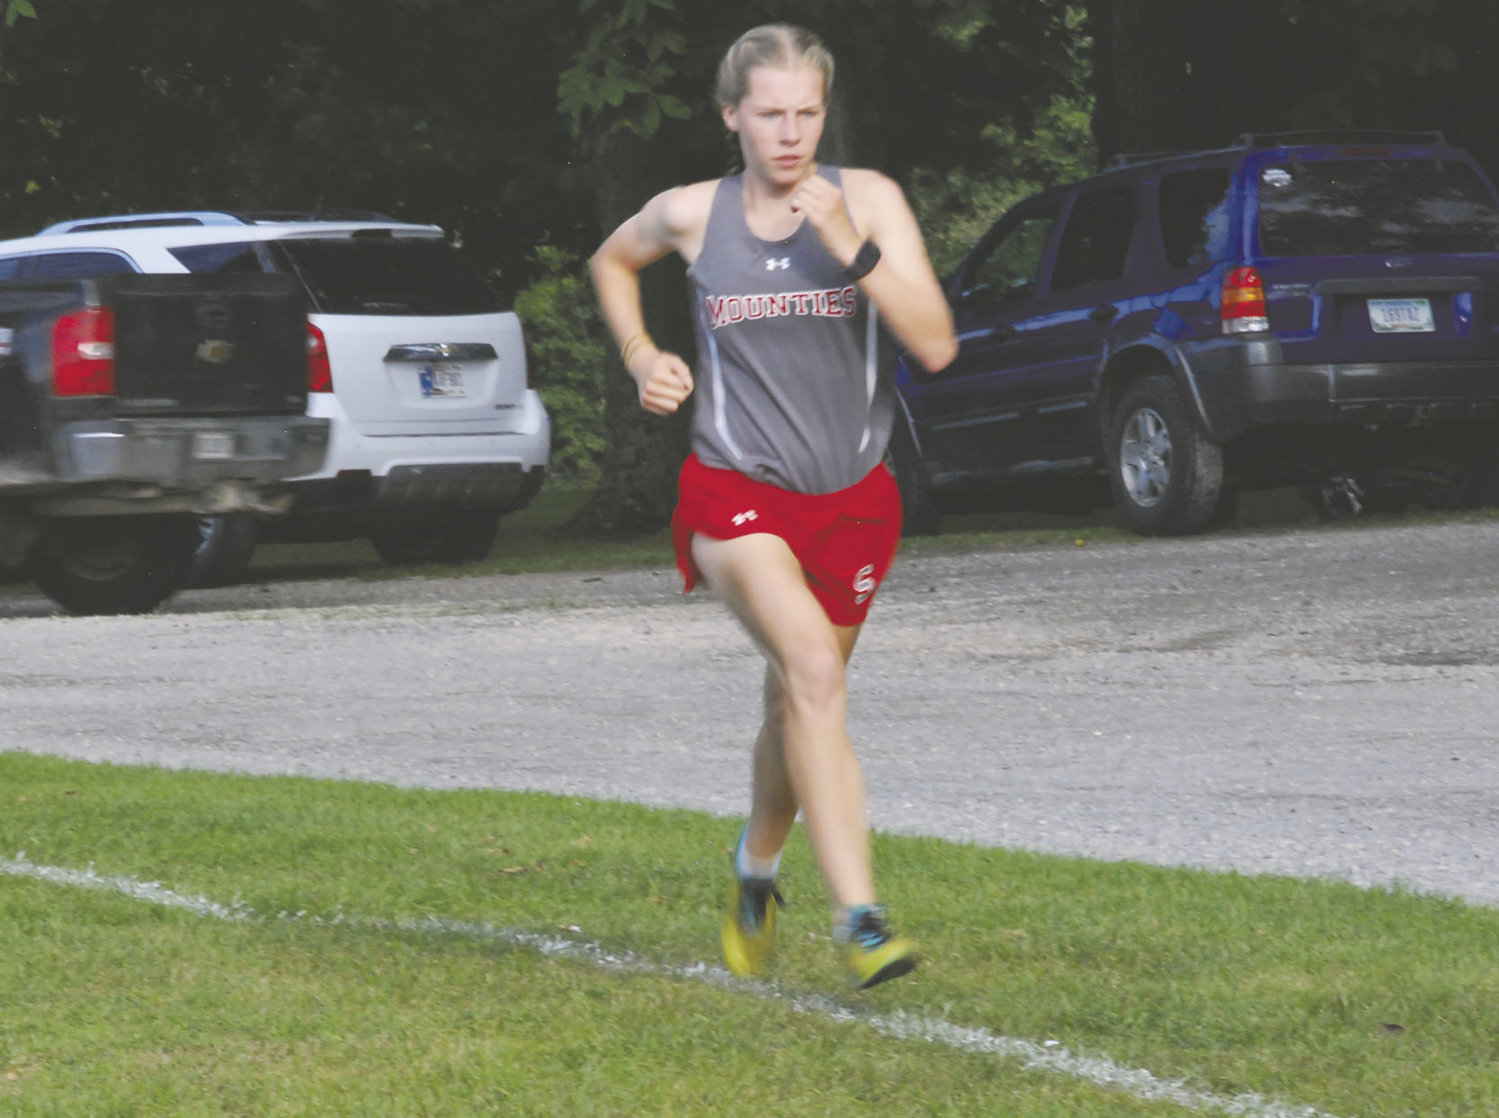 Southmont freshman Faith Allen proved herself as one of the top runners at Seeger's Hokum Karem on Thursday.